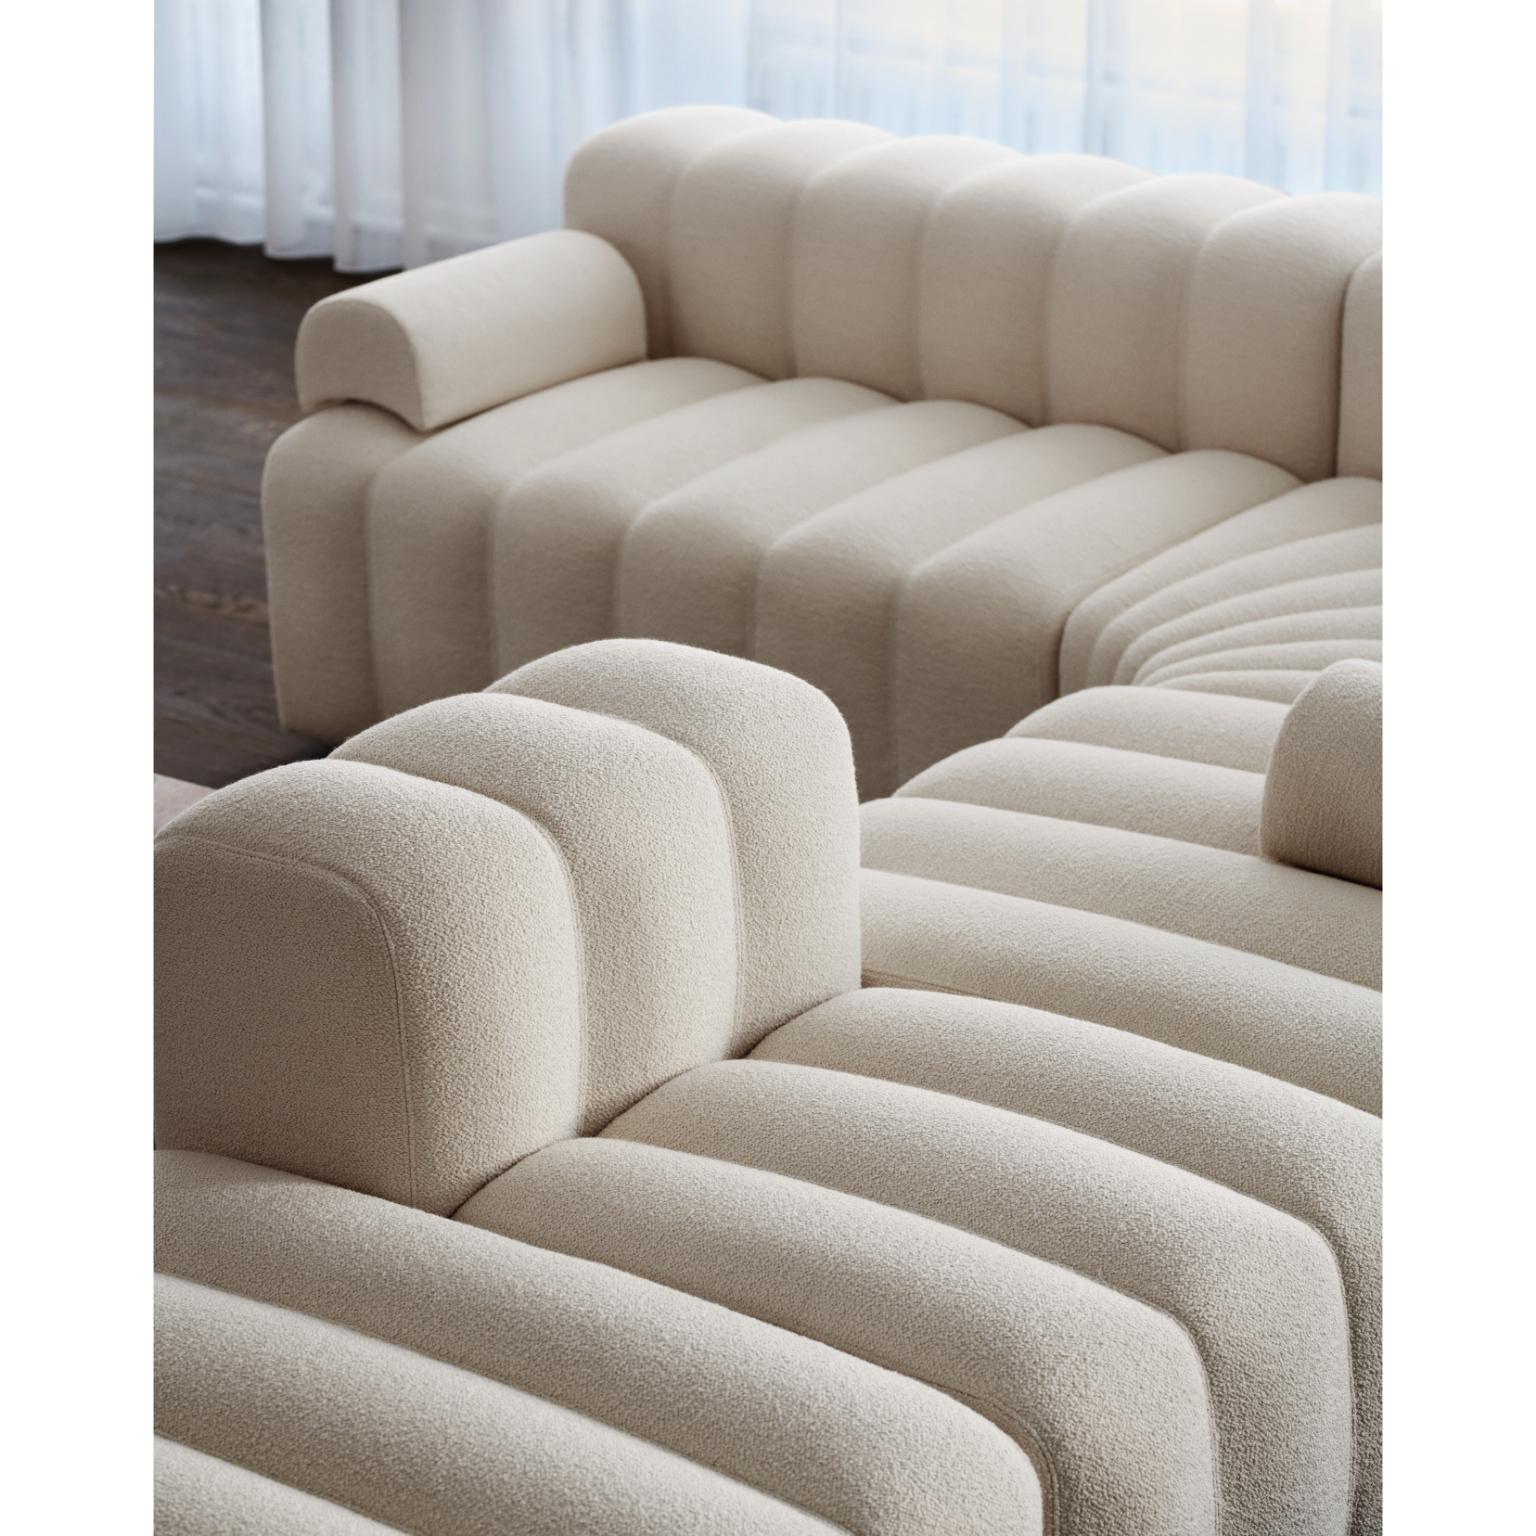 Studio Lounge Small Modular Sofa by NORR11
Dimensions: D 130 x W 60 x H 70 cm. SH 47 cm. 
Materials: Foam, wood and upholstery.
Upholstery: Barnum Boucle Color 3.

Available in different upholstery options. A plywood structure with elastic belts &